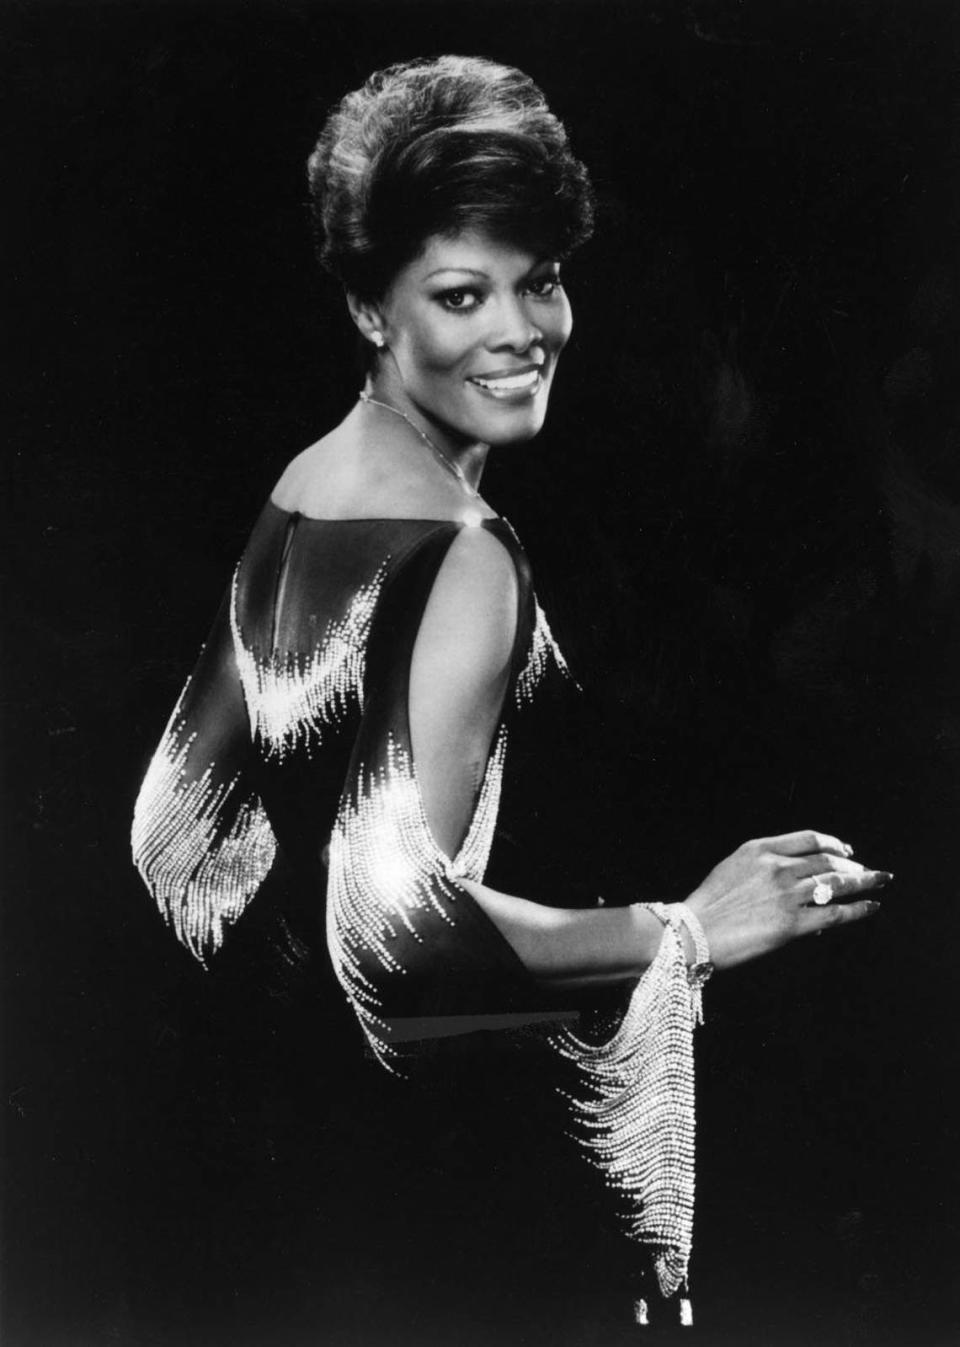 Dionne Warwick’s career has spanned six decades and many musical genres.